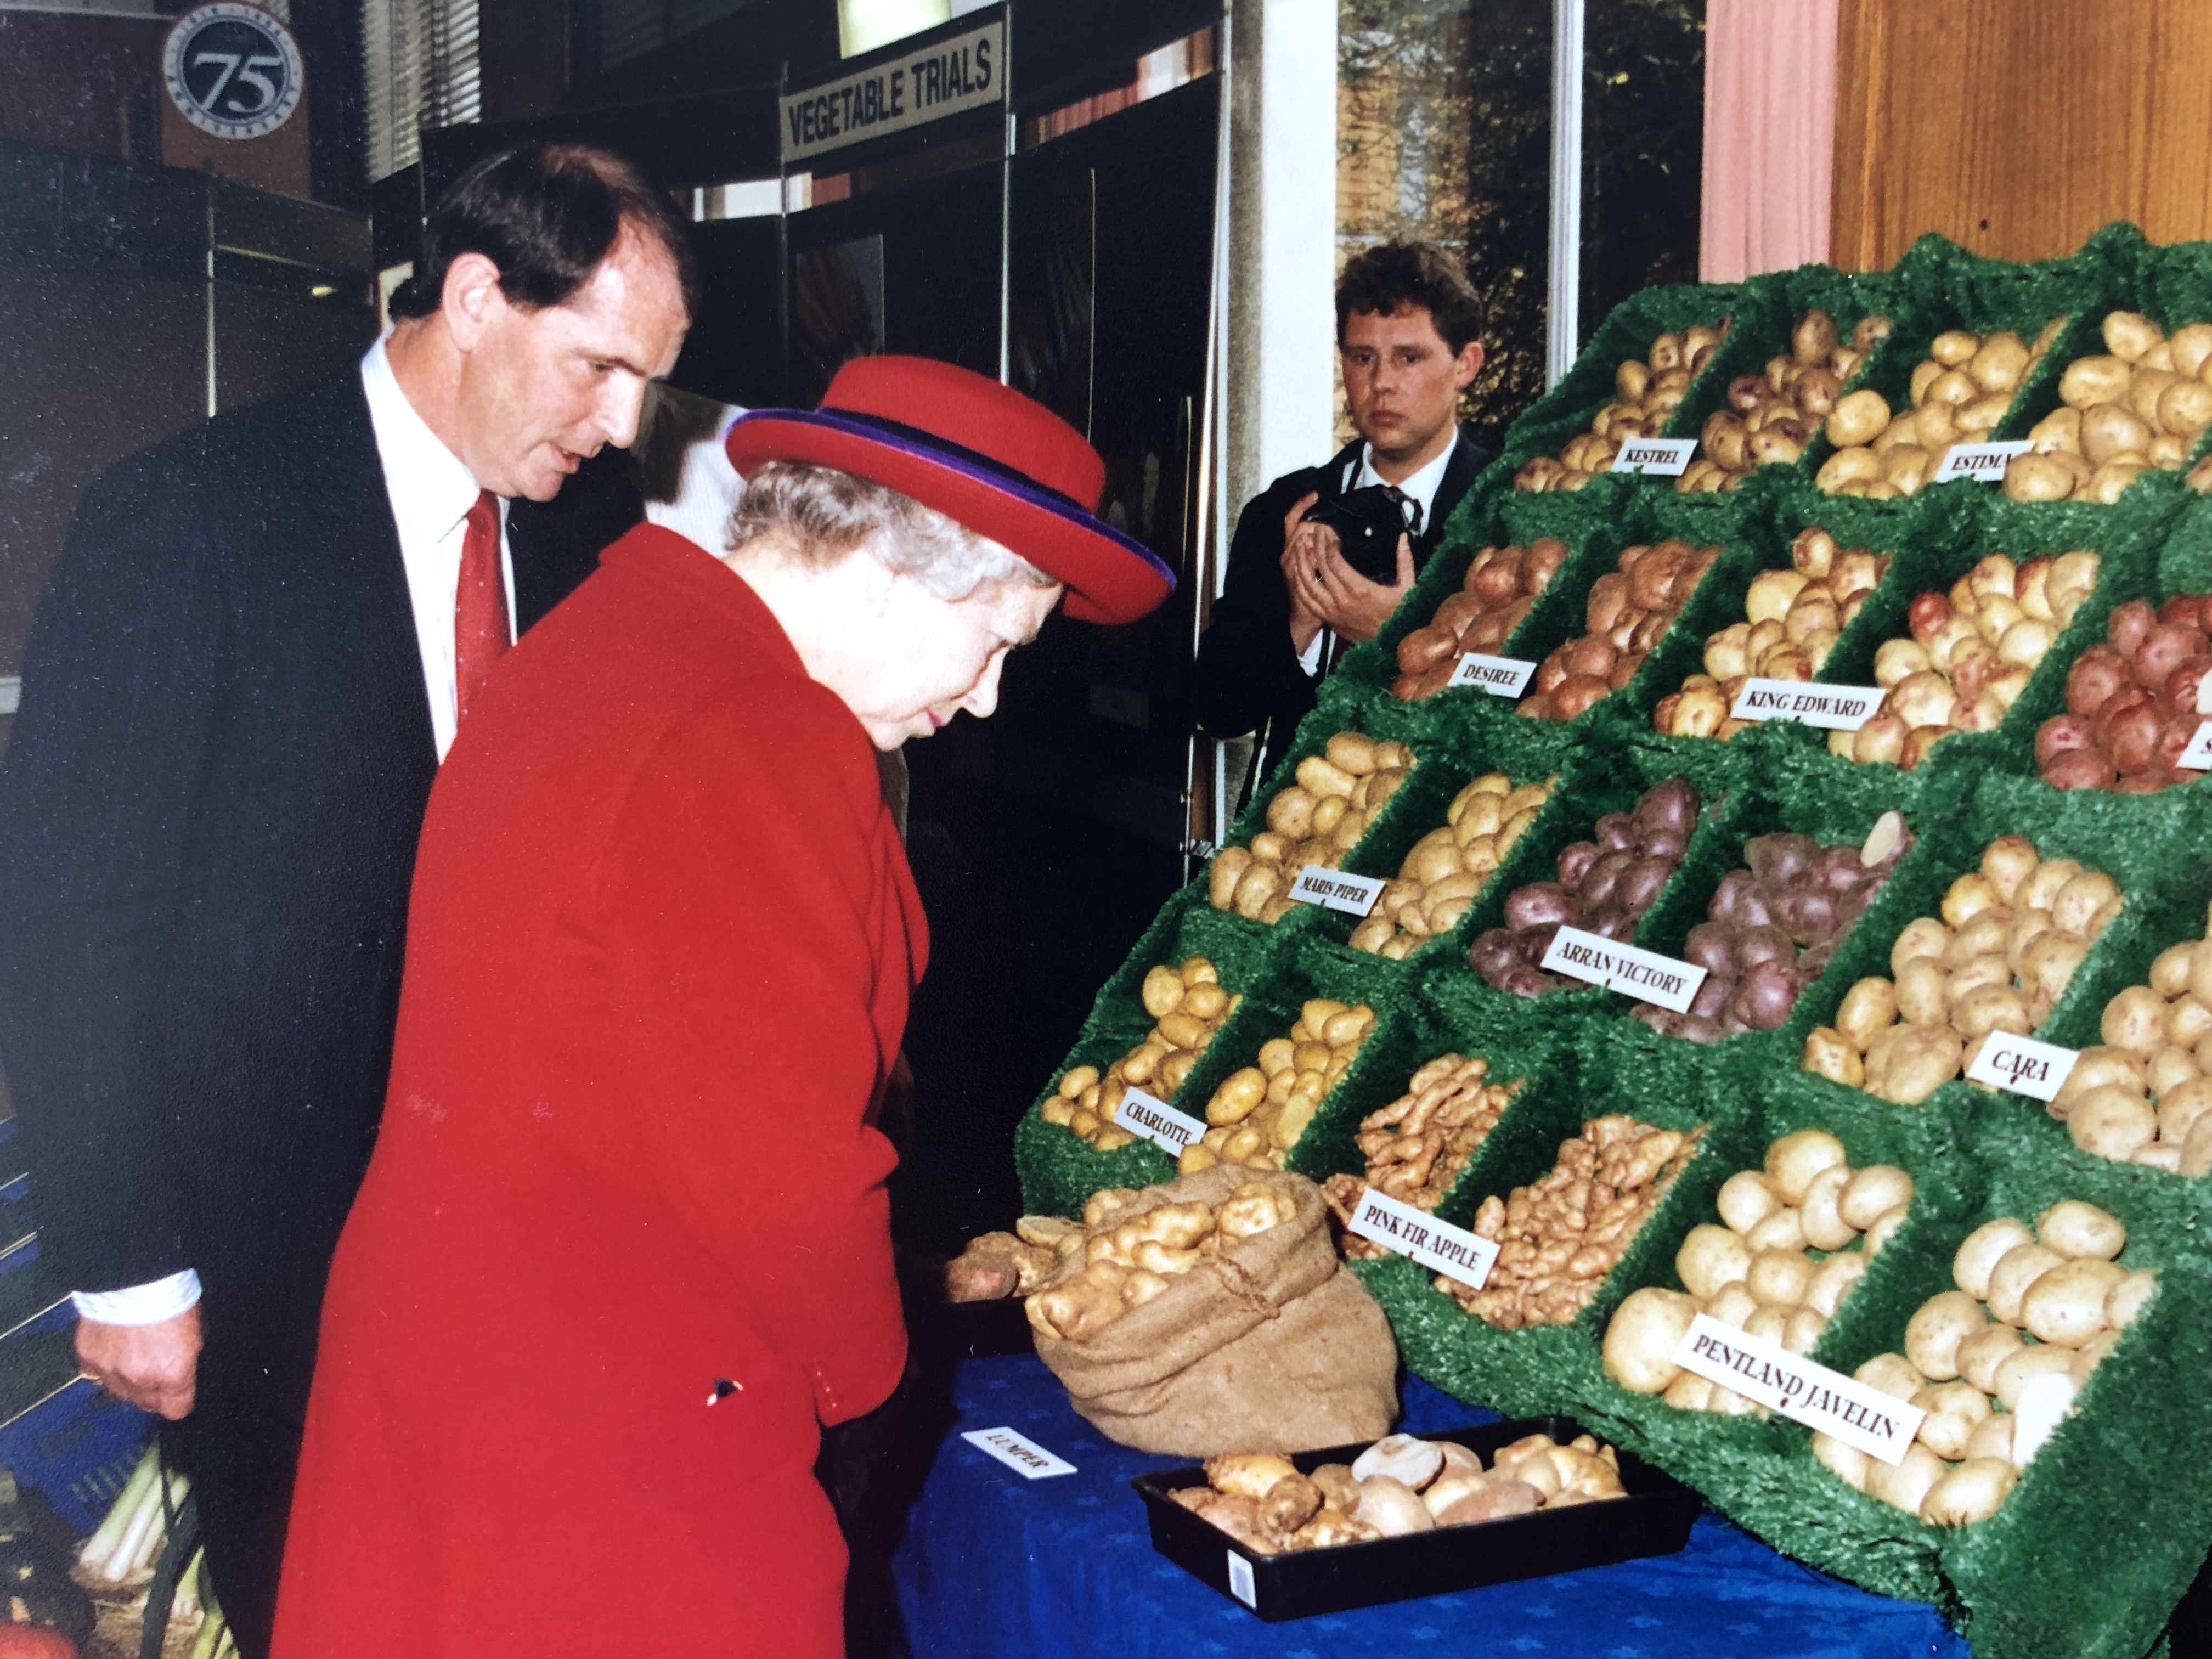 The Queen inspects some potatoes during the 1994 royal visit to NIAB